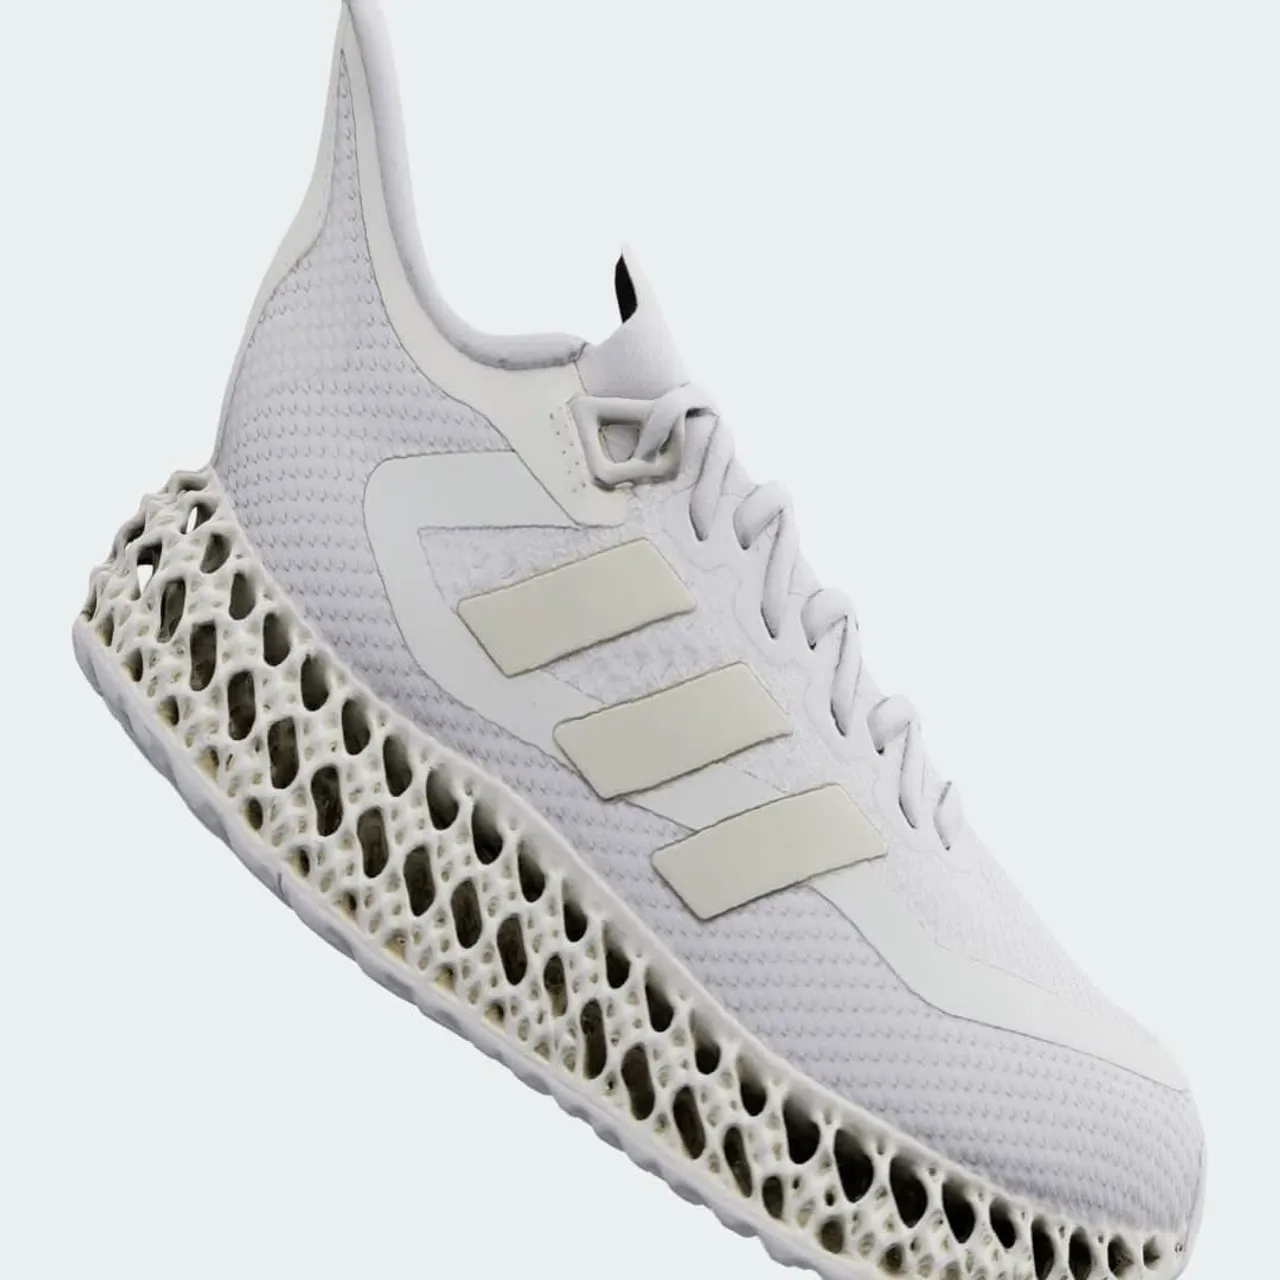 adidas 4DFWD 2 Running Shoes